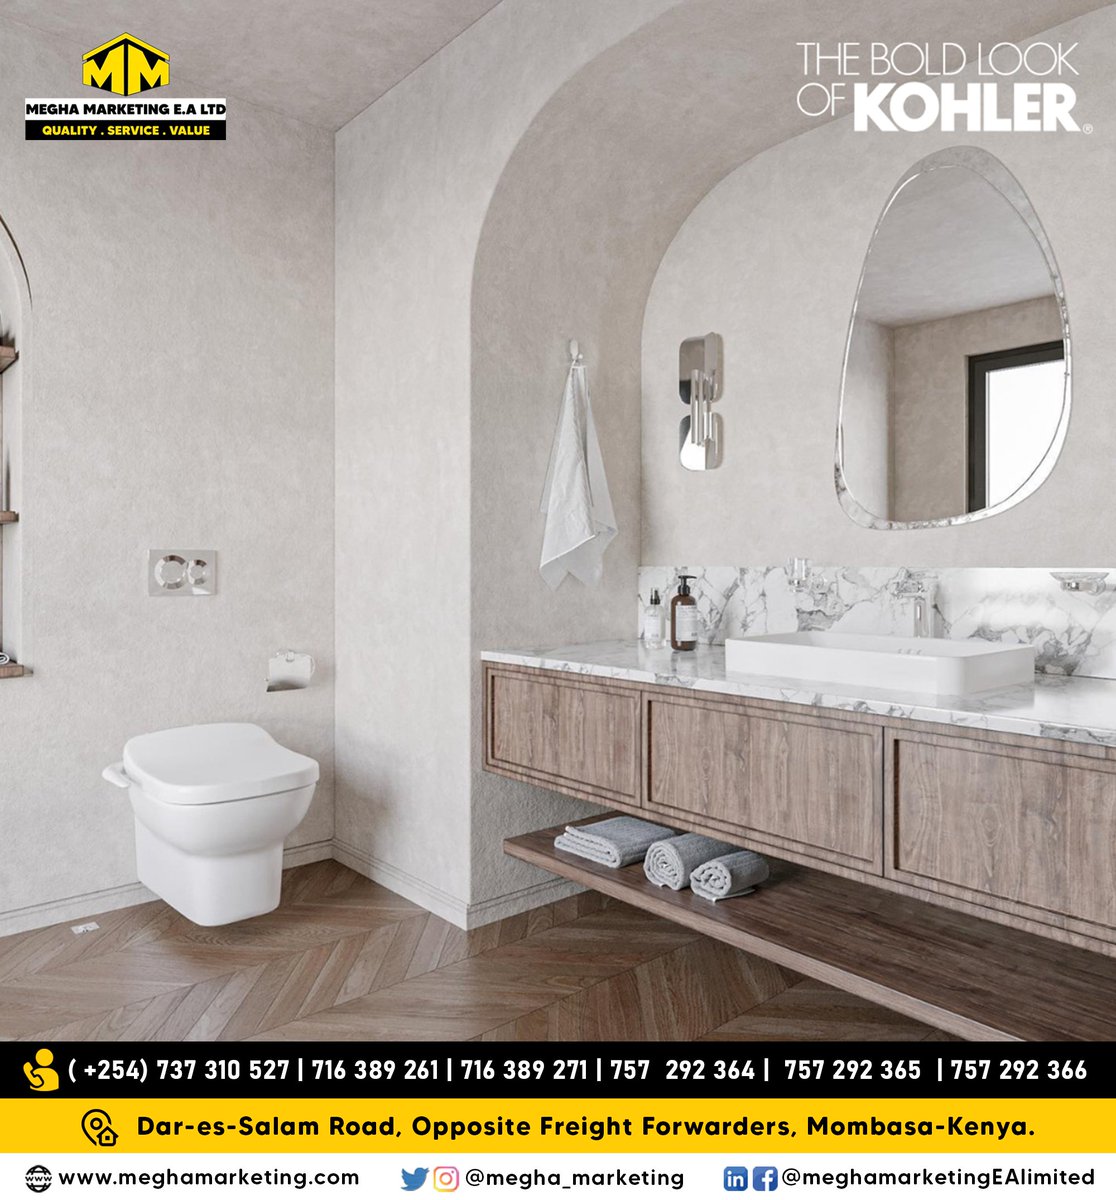 Simple yet elegant, this two-toned #KohlerBoldLook gives your powder bathroom an earthy and welcoming feel.

The grandeur of the Lasa white marble vanity counter and the unique mirror shape draw attention as soon as yo...instagram.com/p/C1t3EgqInPx/